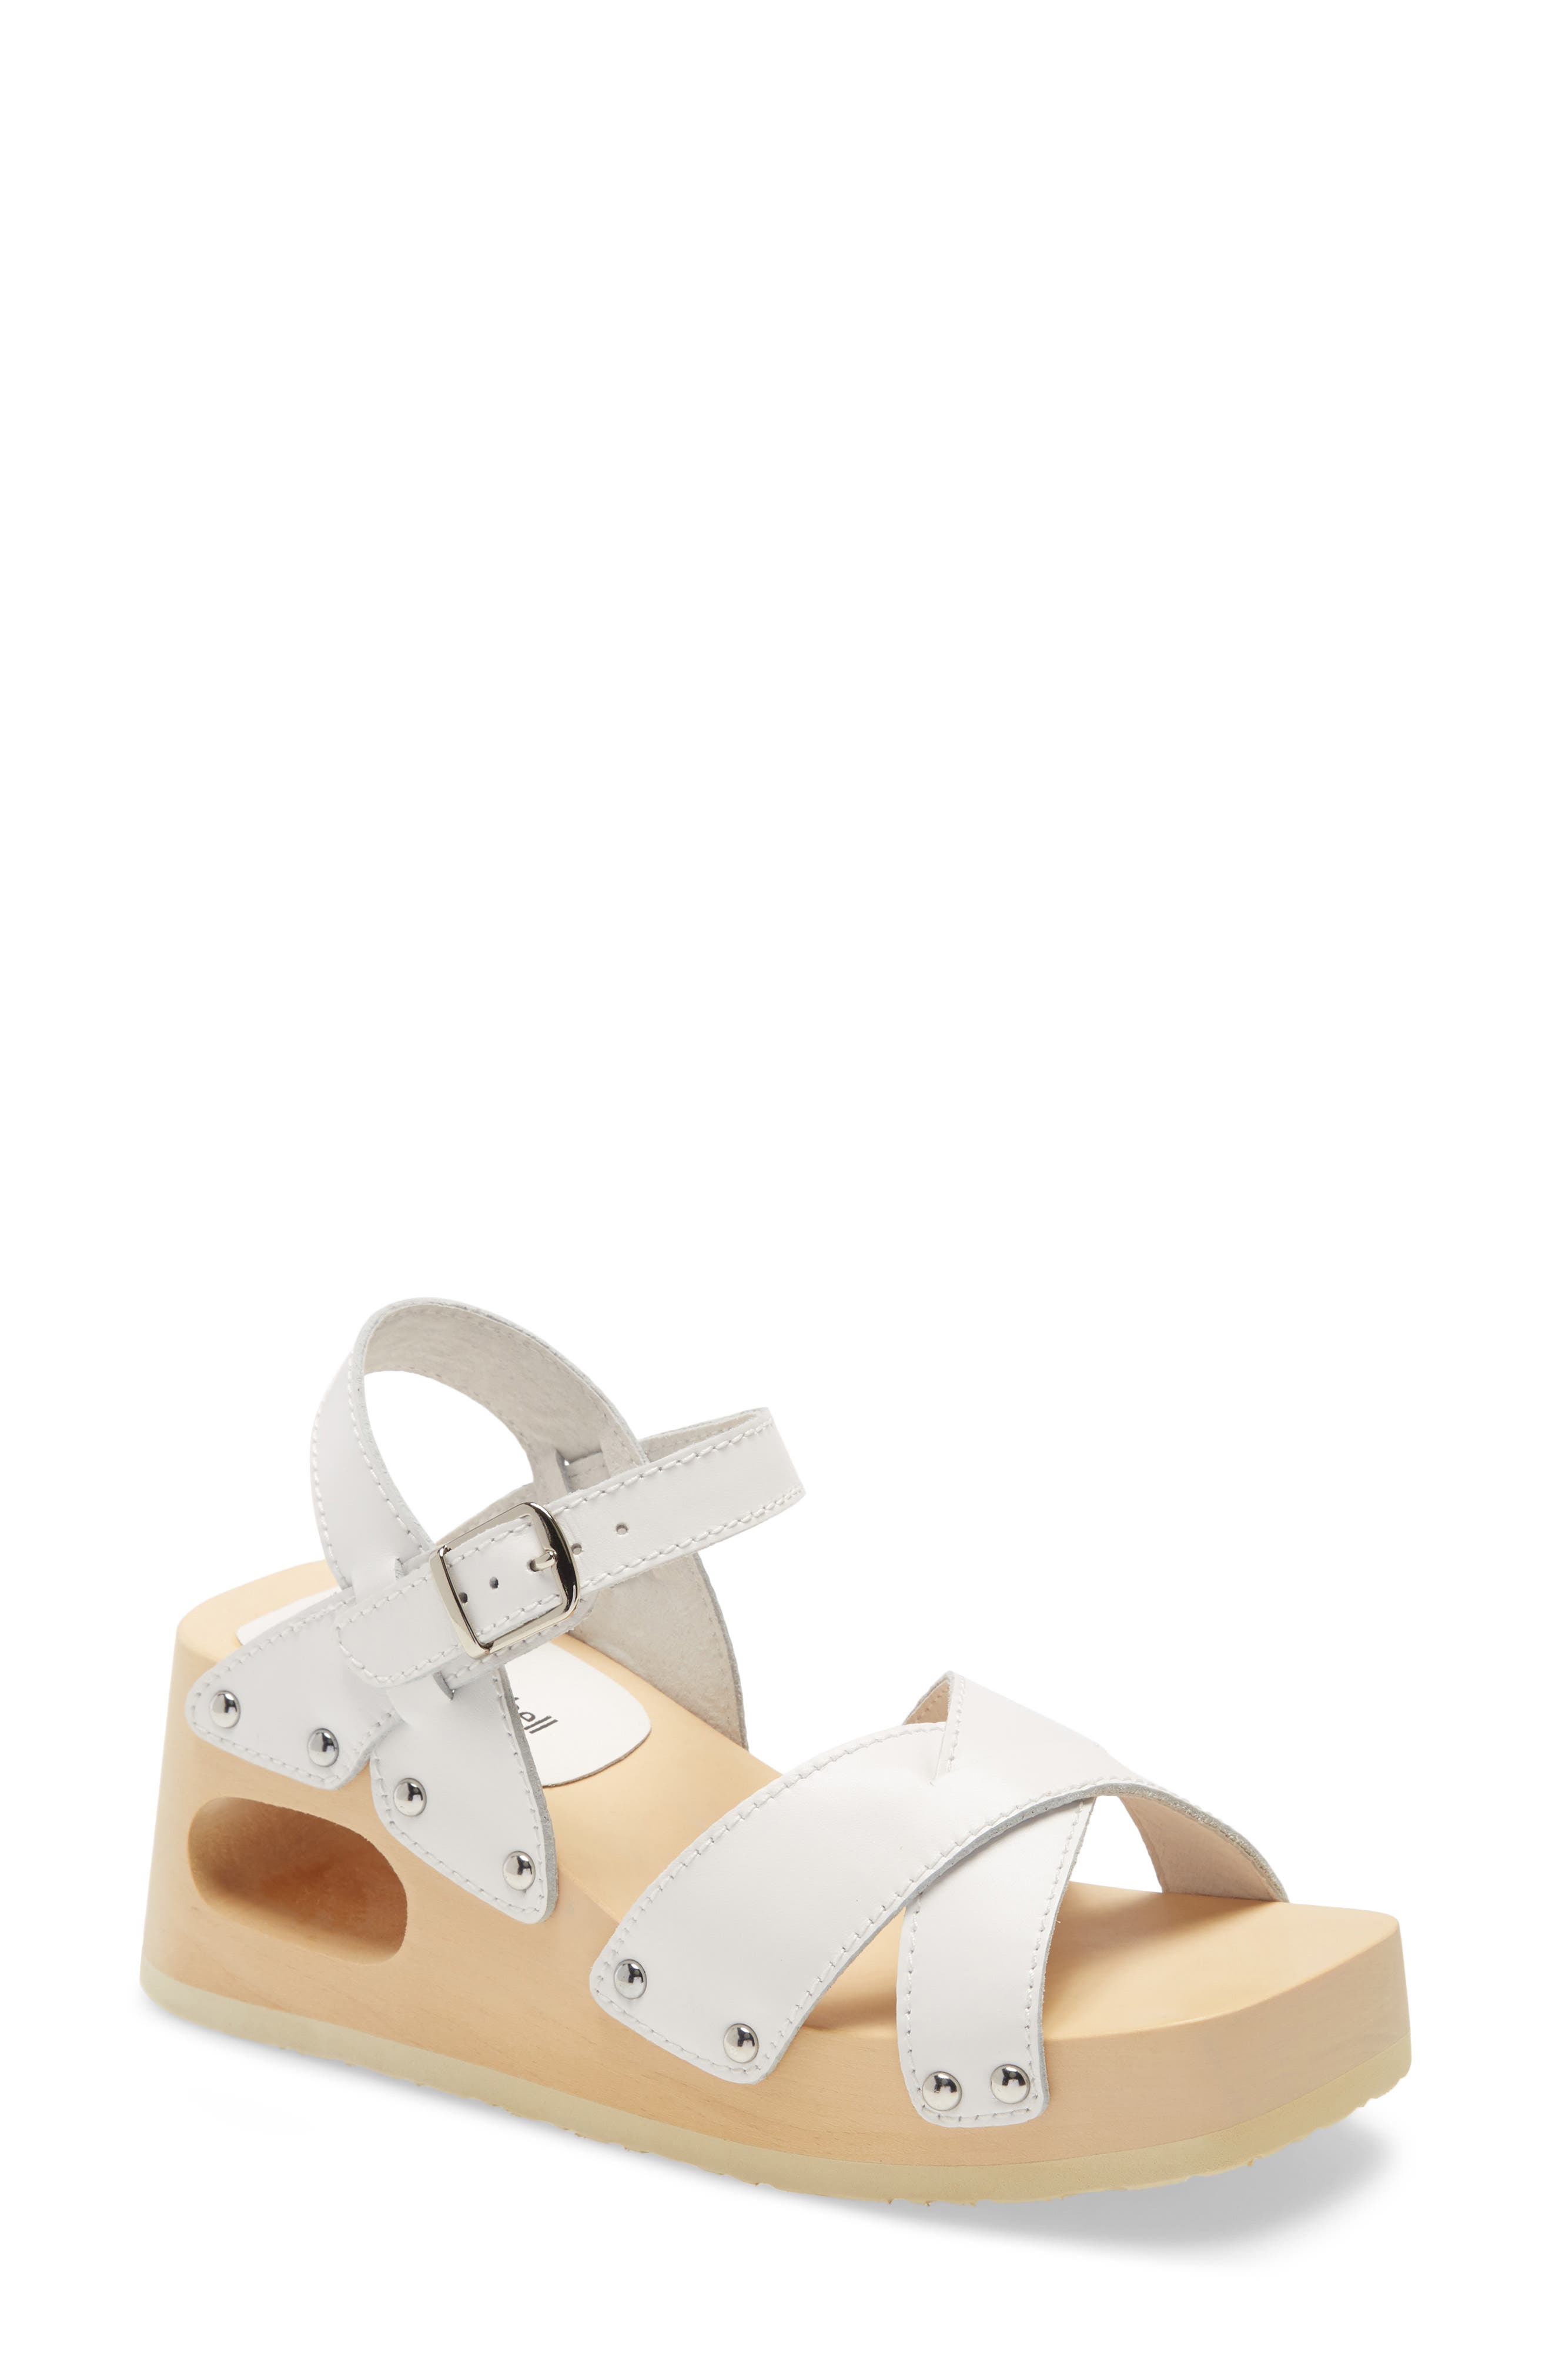 Jeffrey Campbell | Spiced Wood Wedge 